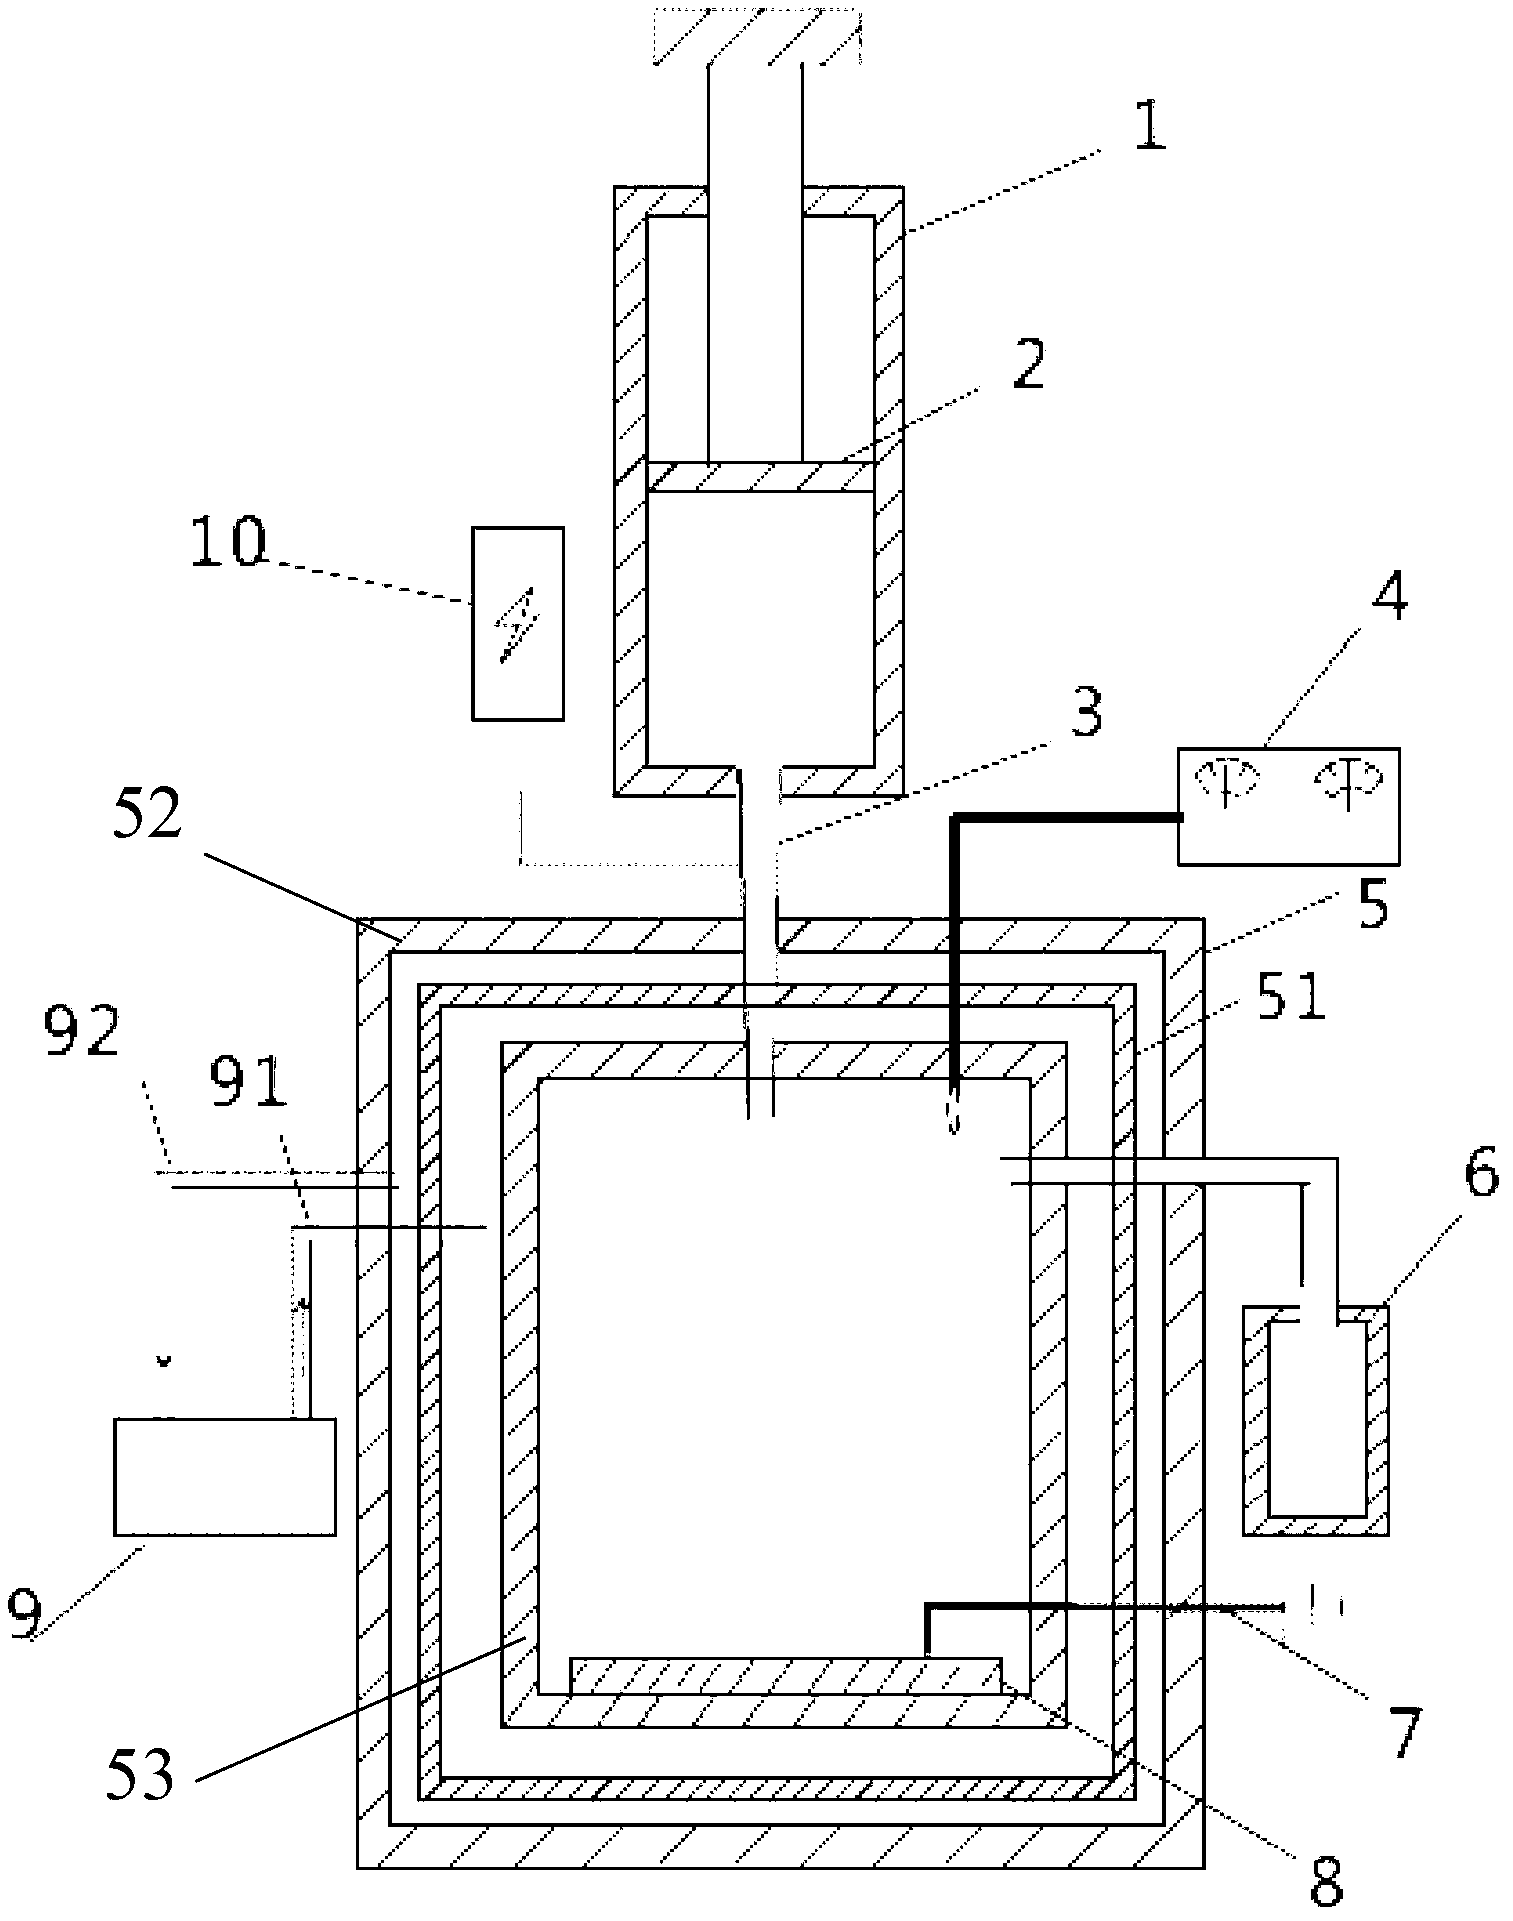 Electrostatic spinning device capable of adjusting spinning temperature and humidity